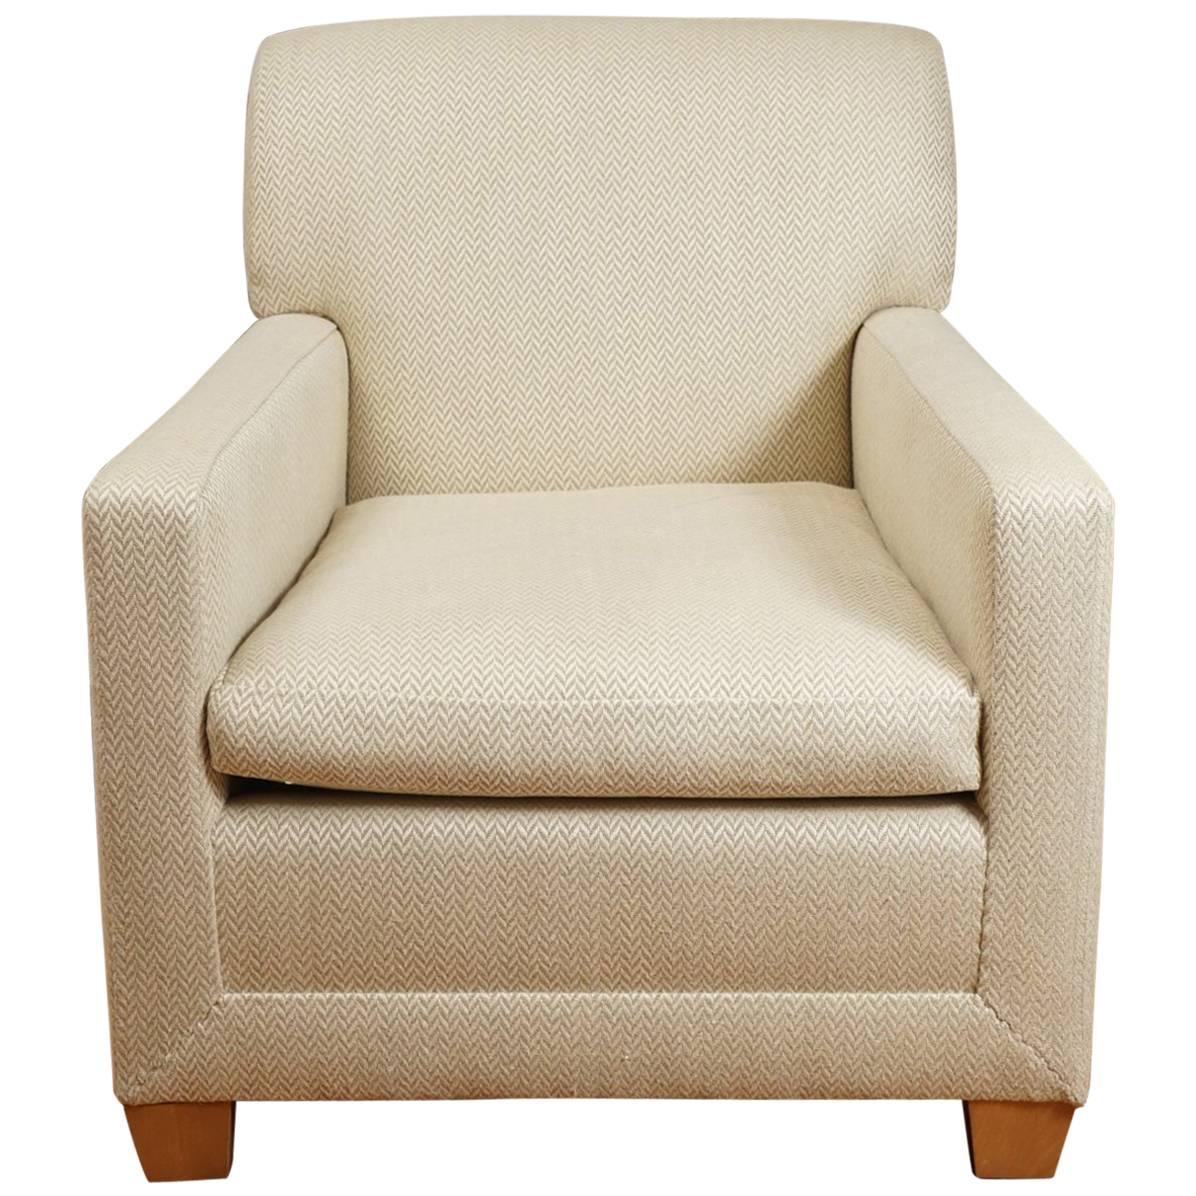 Square Armchair For Sale